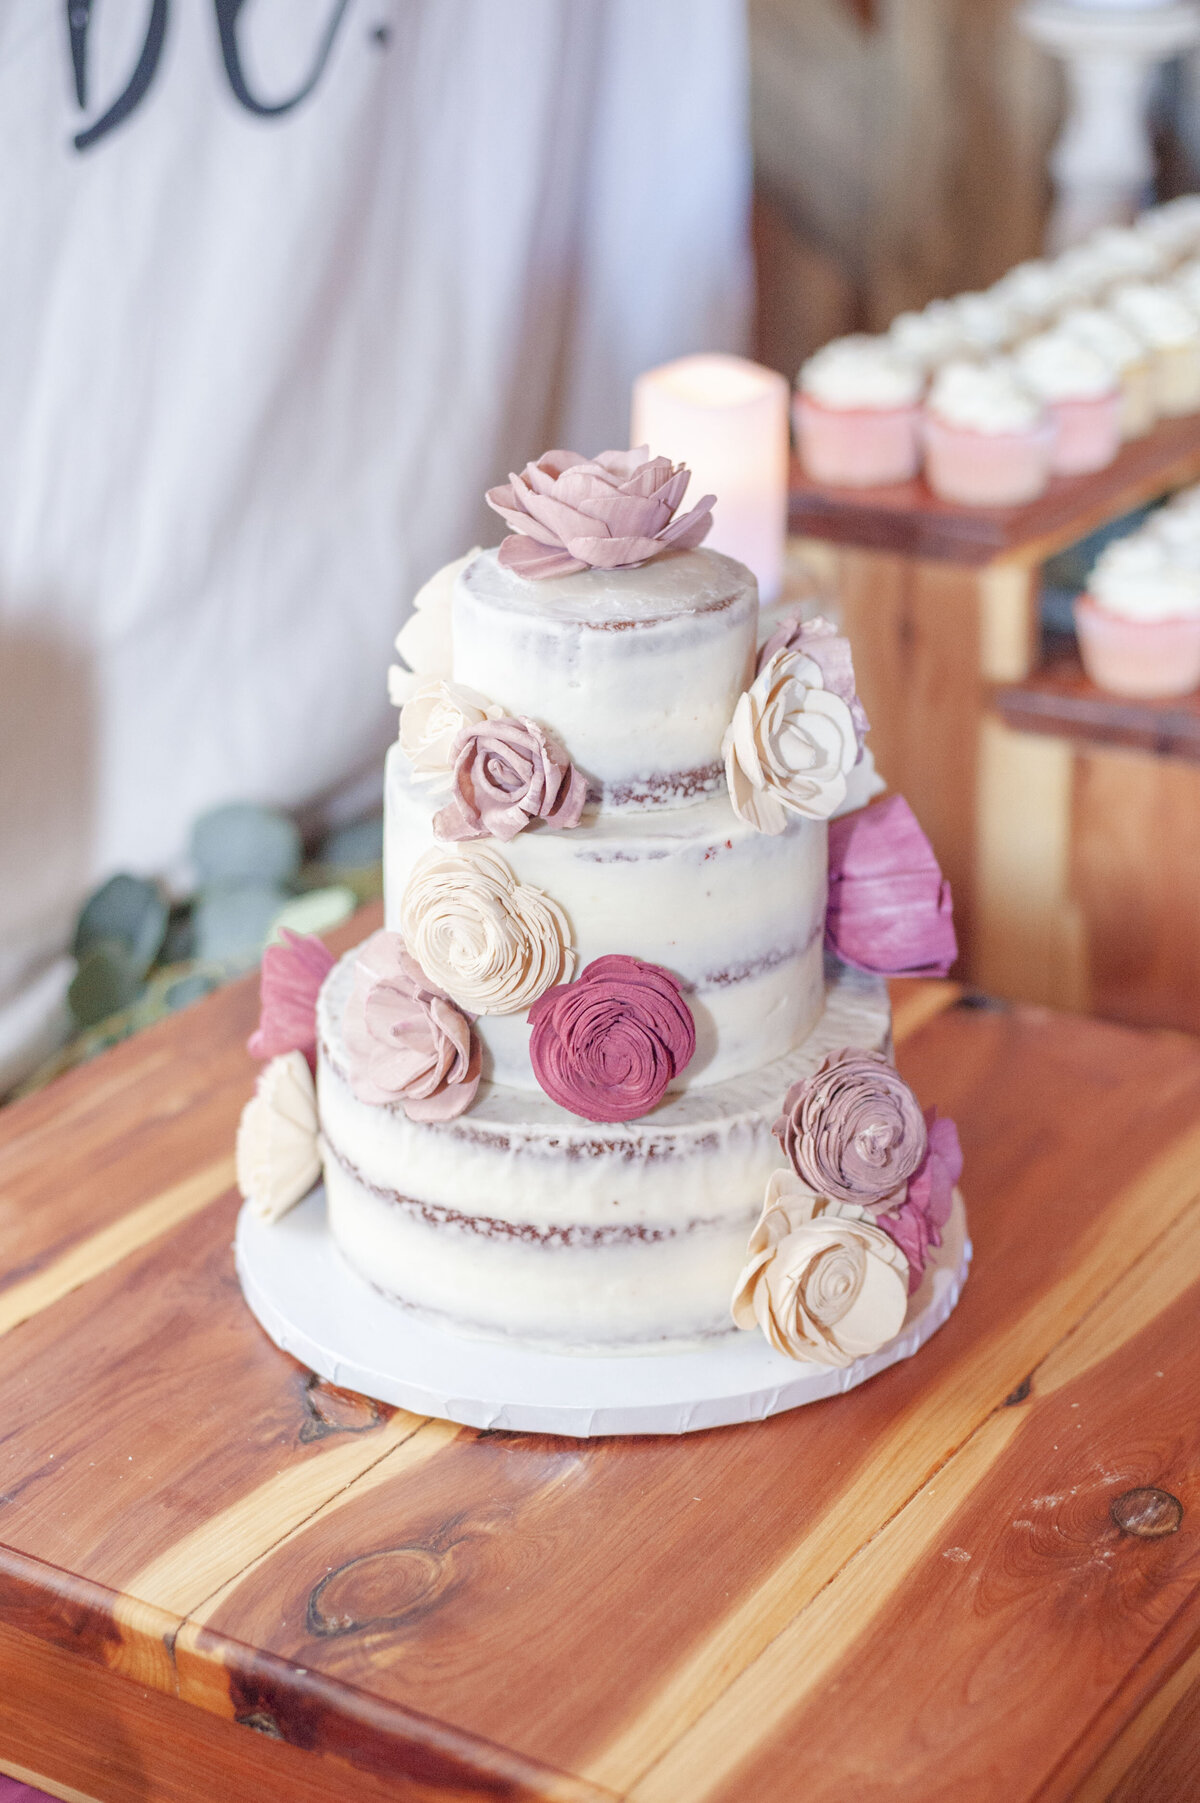 Weding cake decorated with wooden roses